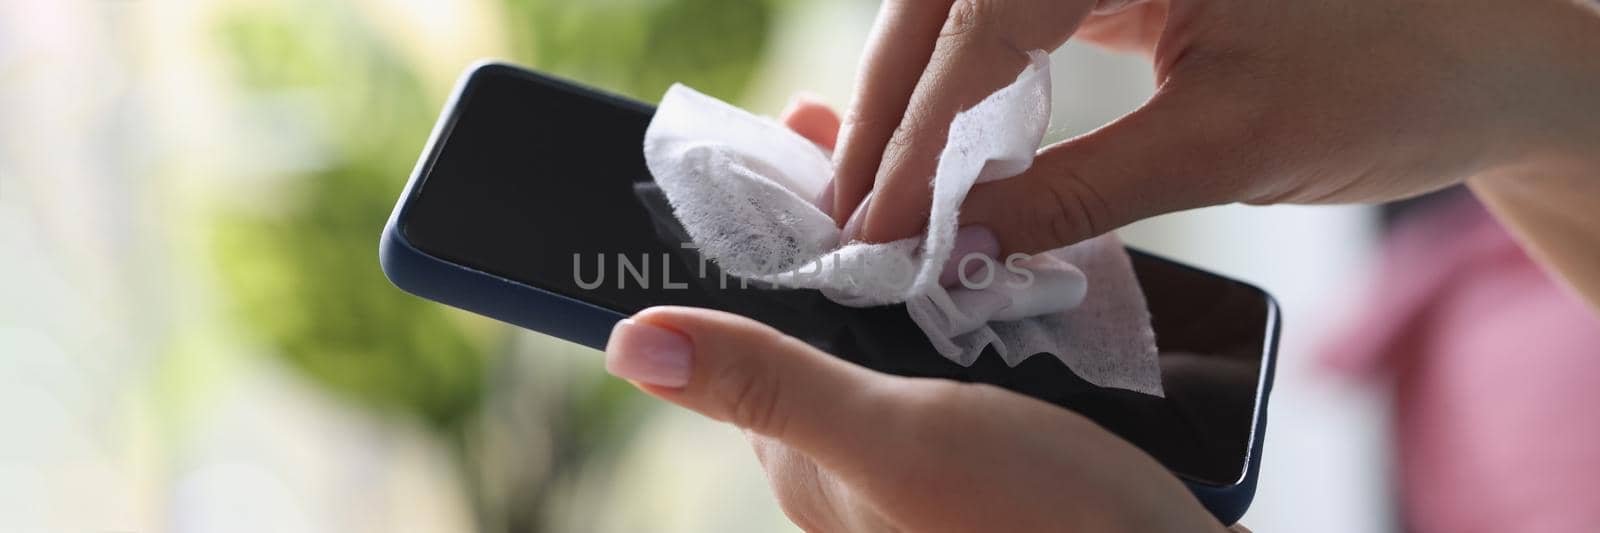 Close-up of cleaning mobile phone screen with wet wipe, antibacterial and disinfecting wipe. Protective glass on smartphone screen. Technology, cleaning, prevent virus concept. Blurred background